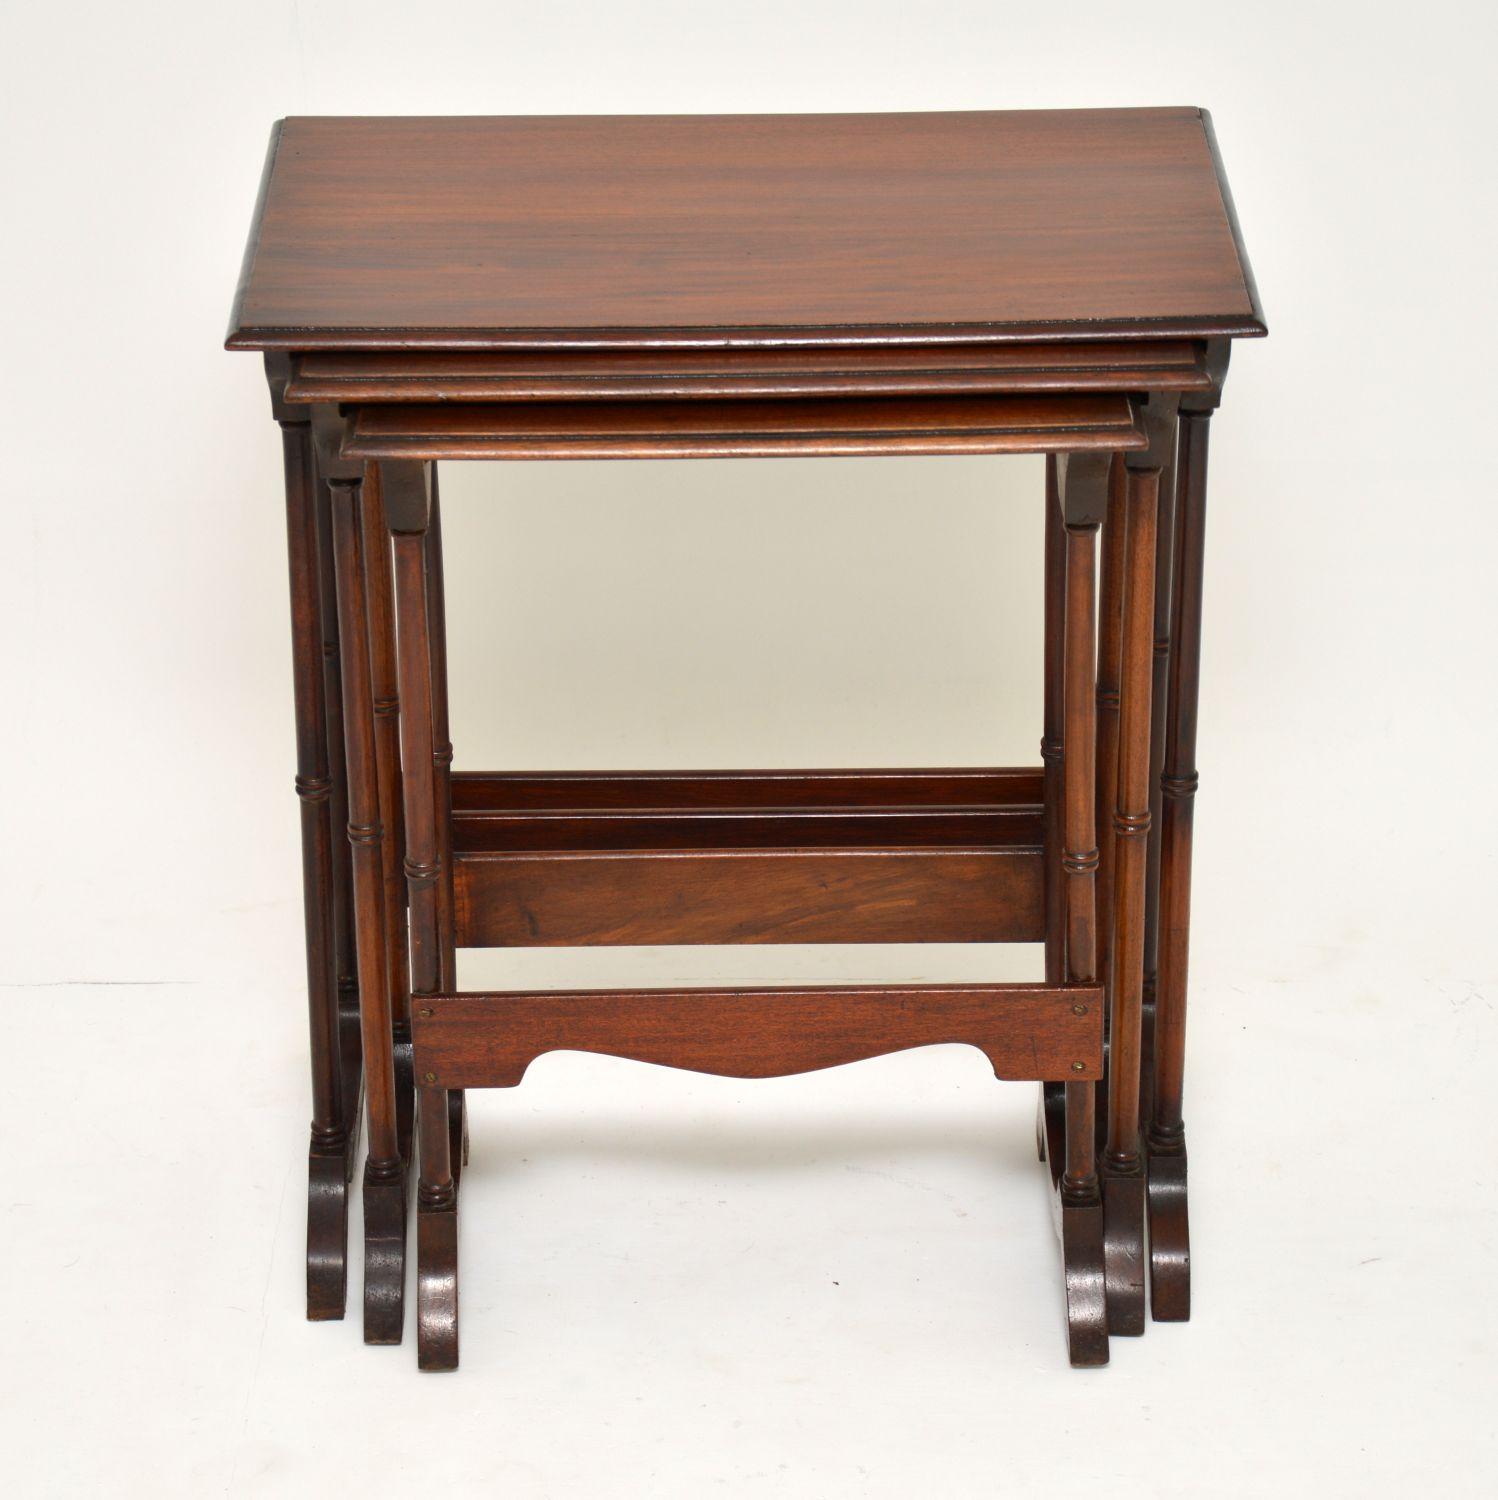 Antique Edwardian mahogany nest of three tables in excellent condition, dating from the 1900-1910 period. They are very stabile and the legs have back and front supports between them.

Measures: Width 24 inches, 61 cm
Depth 15 inches, 39